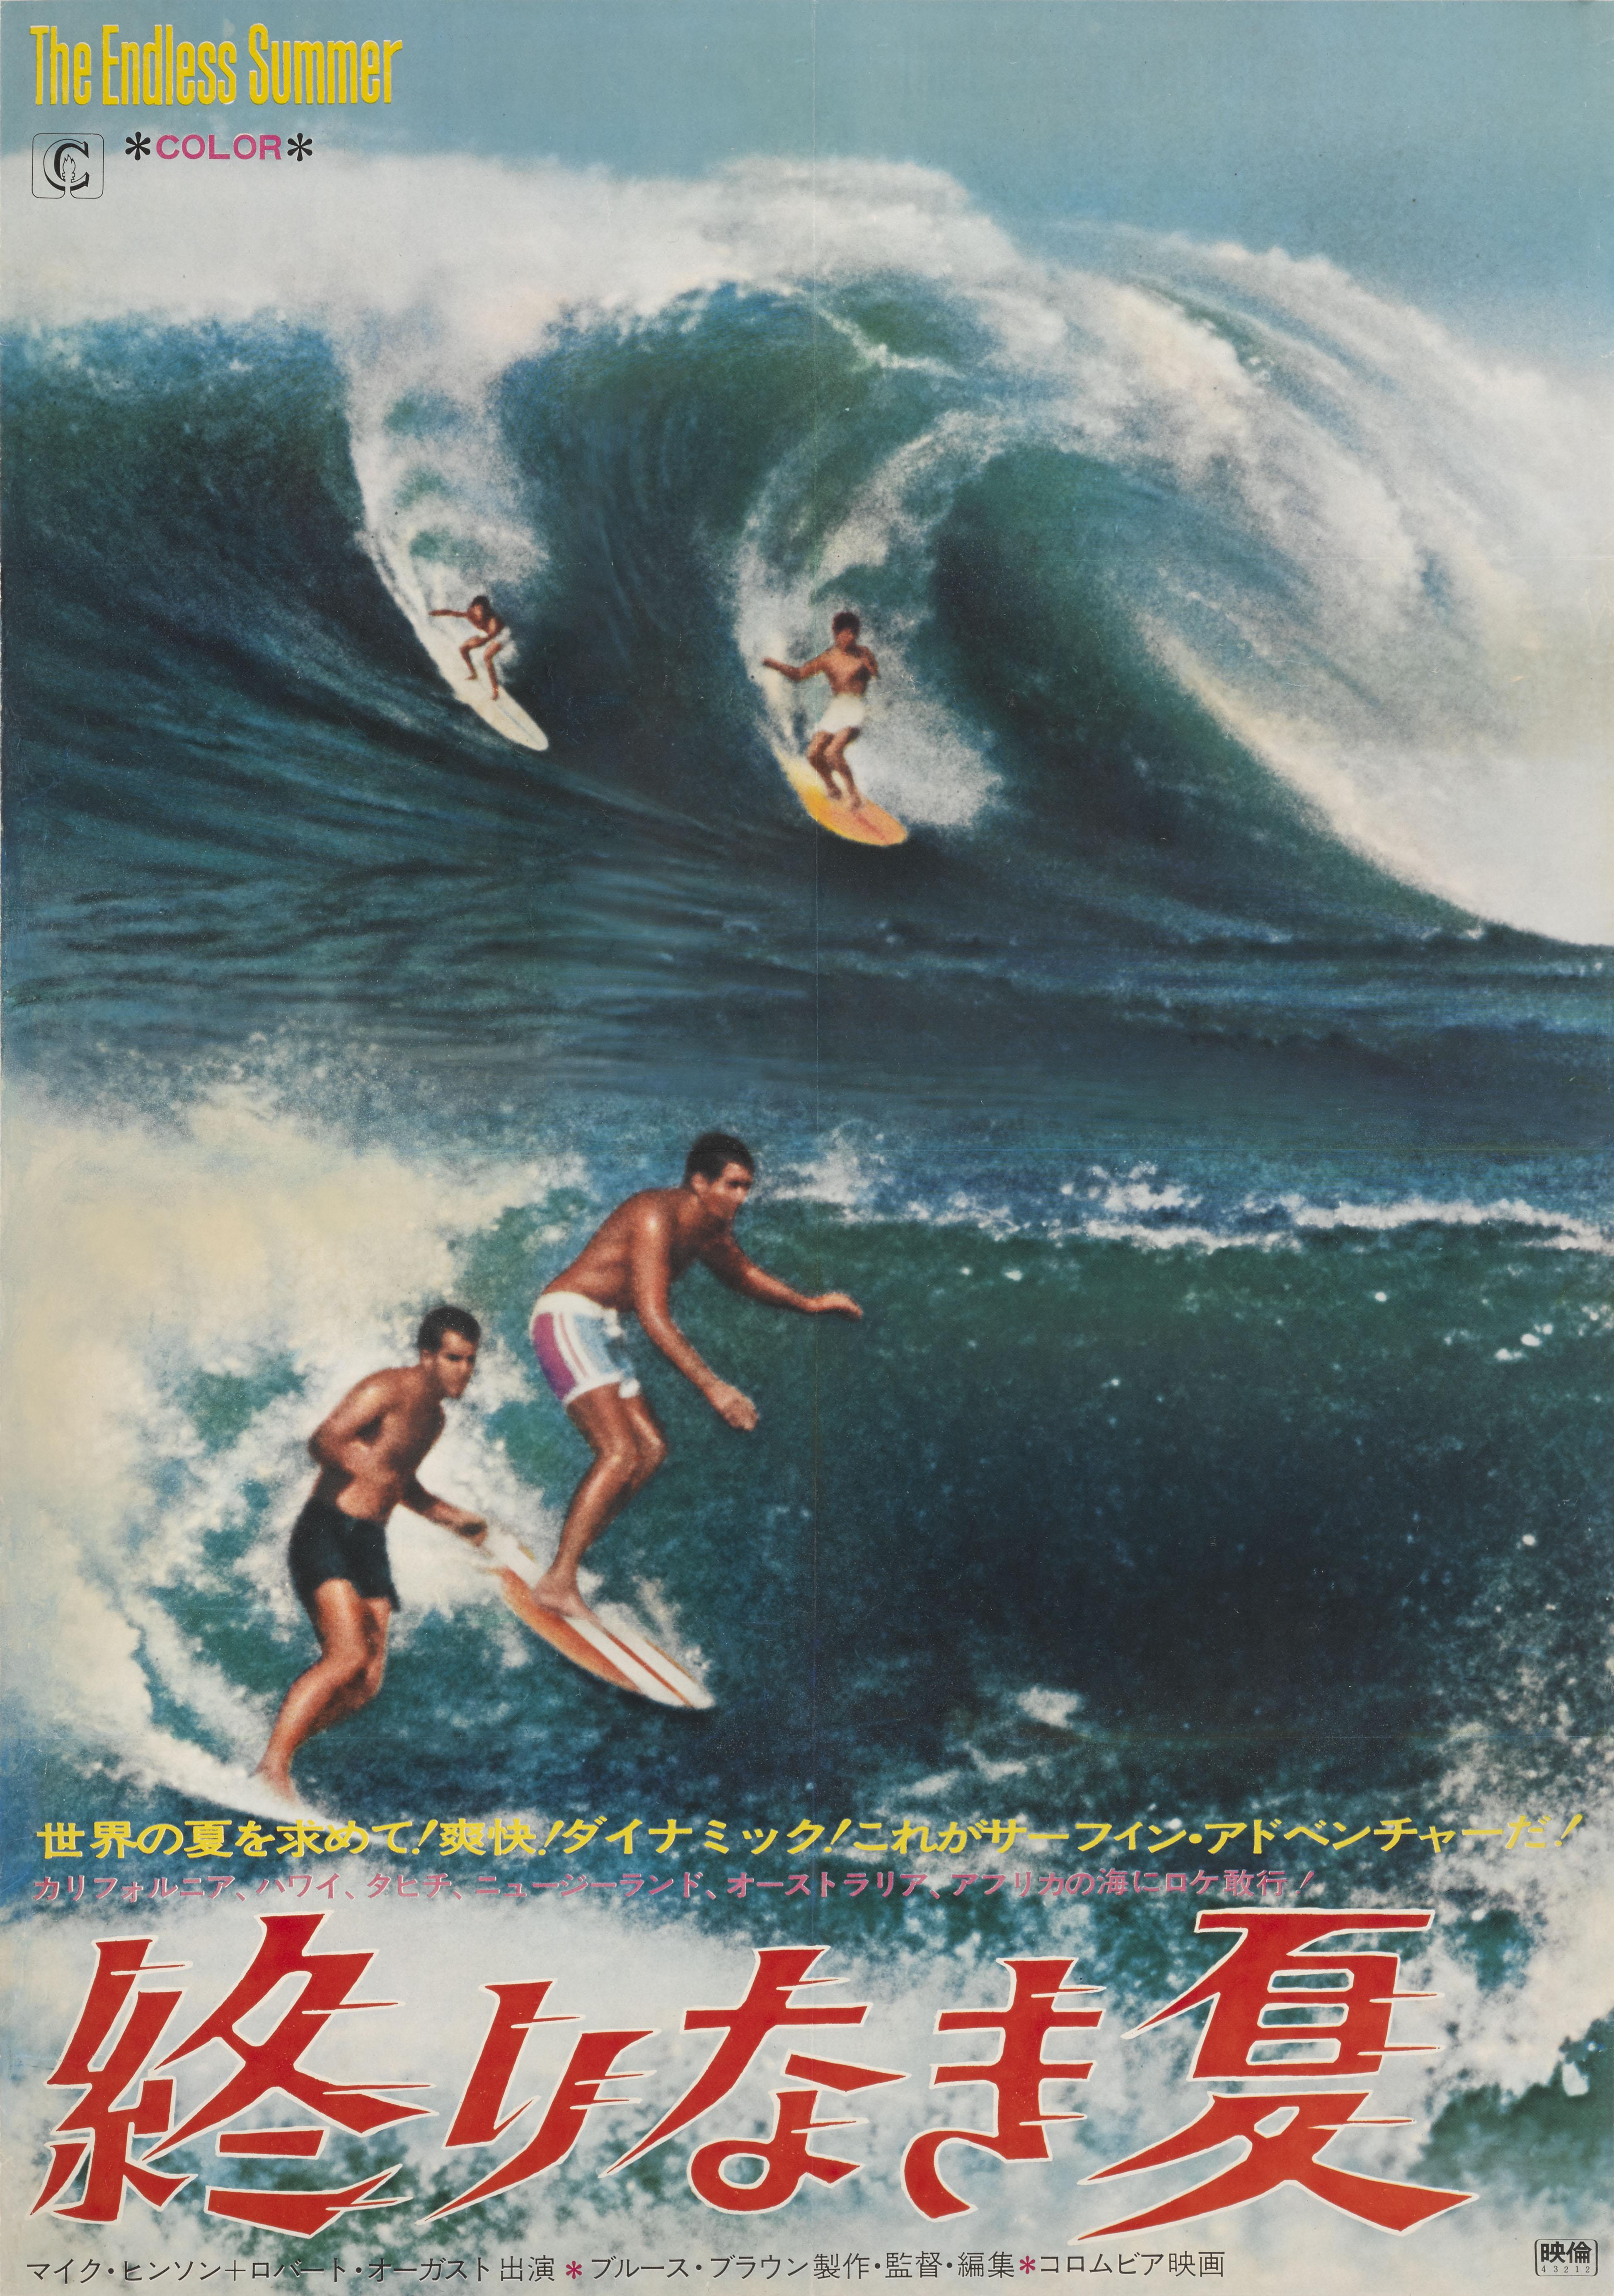 Japanese The Endless Summer For Sale